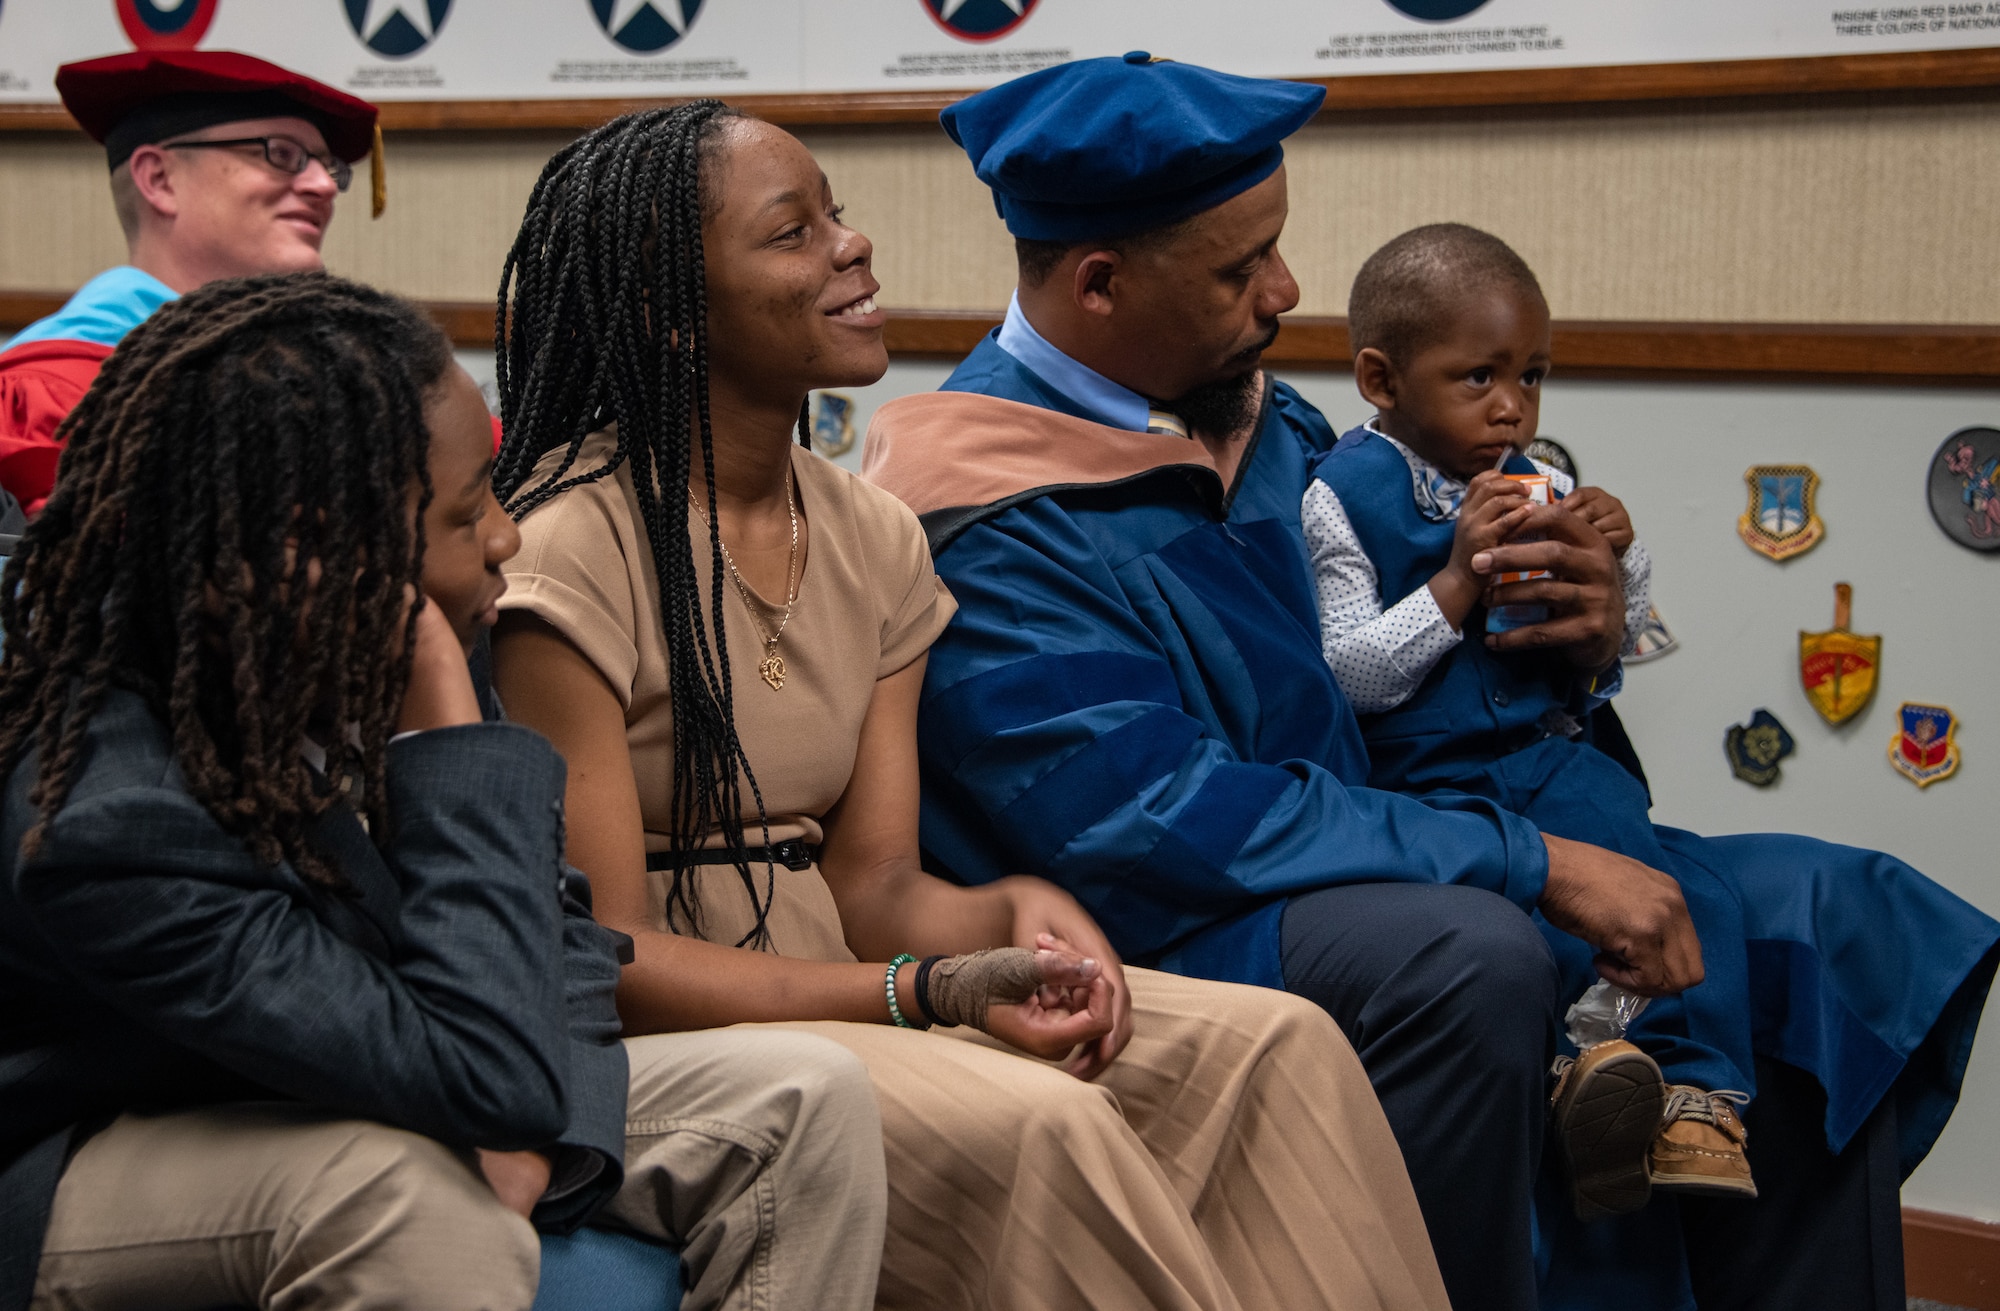 The family of Senior Master Sgt. Anique S. McElveen looks on as she receives her doctorial hood during a ceremony at the Enlisted Heritage Hall on Maxwell Air Force Base, Gunter Annex, March 10, 2023.  She is part of just .007 percent of enlisted Airmen to receive a doctoral degree. McElveen is the superintendent of the College of Academic Management at the Community College of the Air Force. (U.S. Air Force photo/Brian Ferguson)